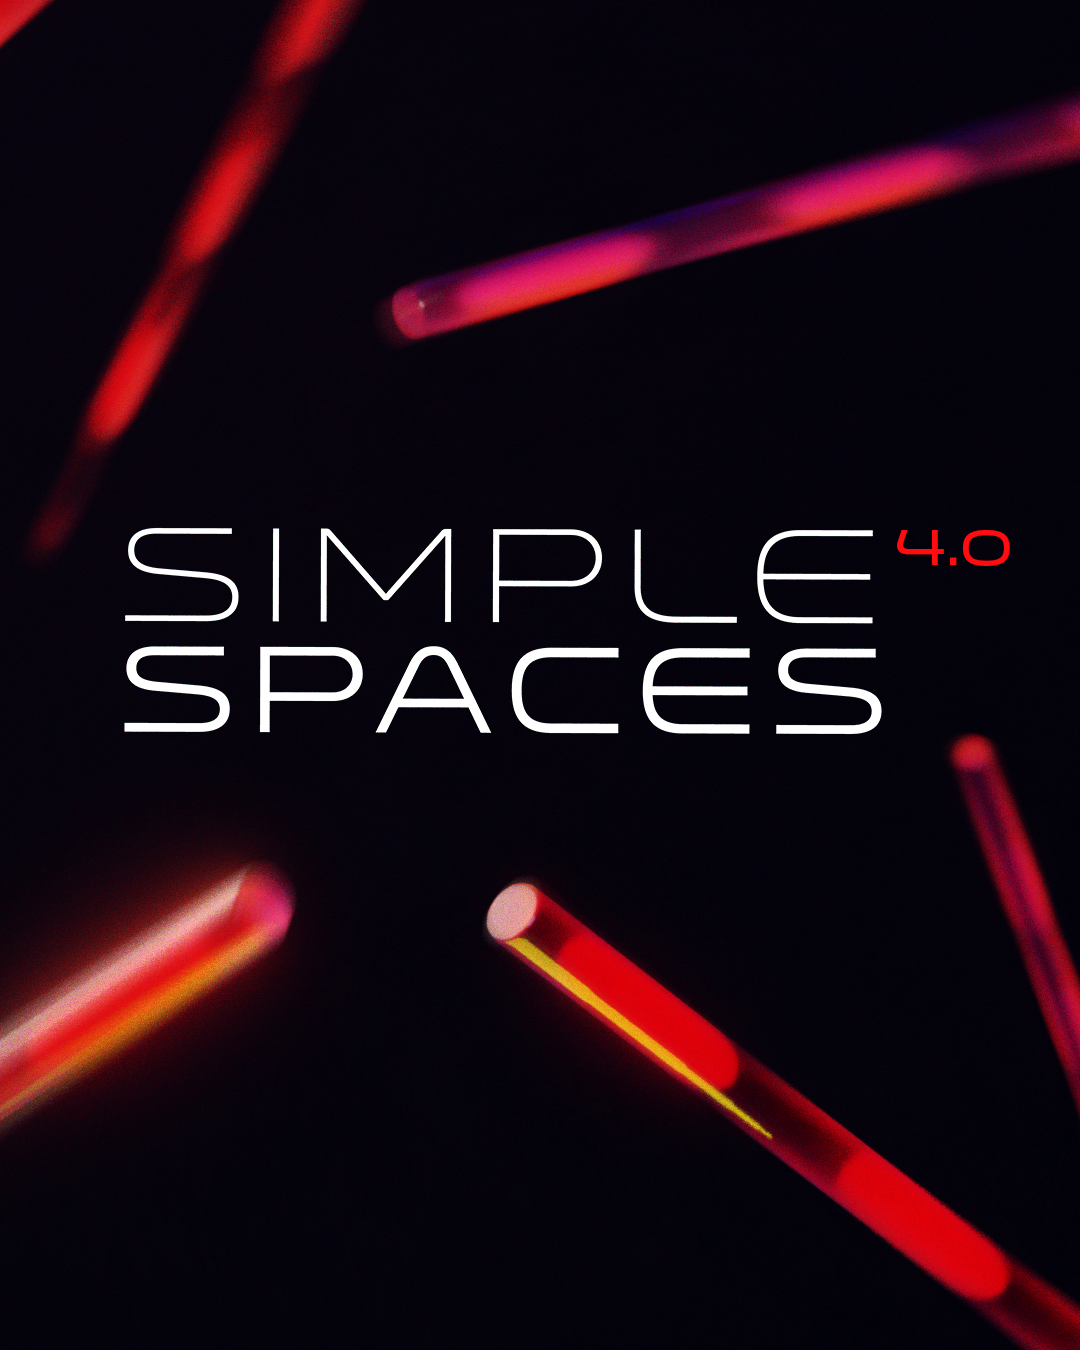 Simple Spaces 4.0 - フライヤー表